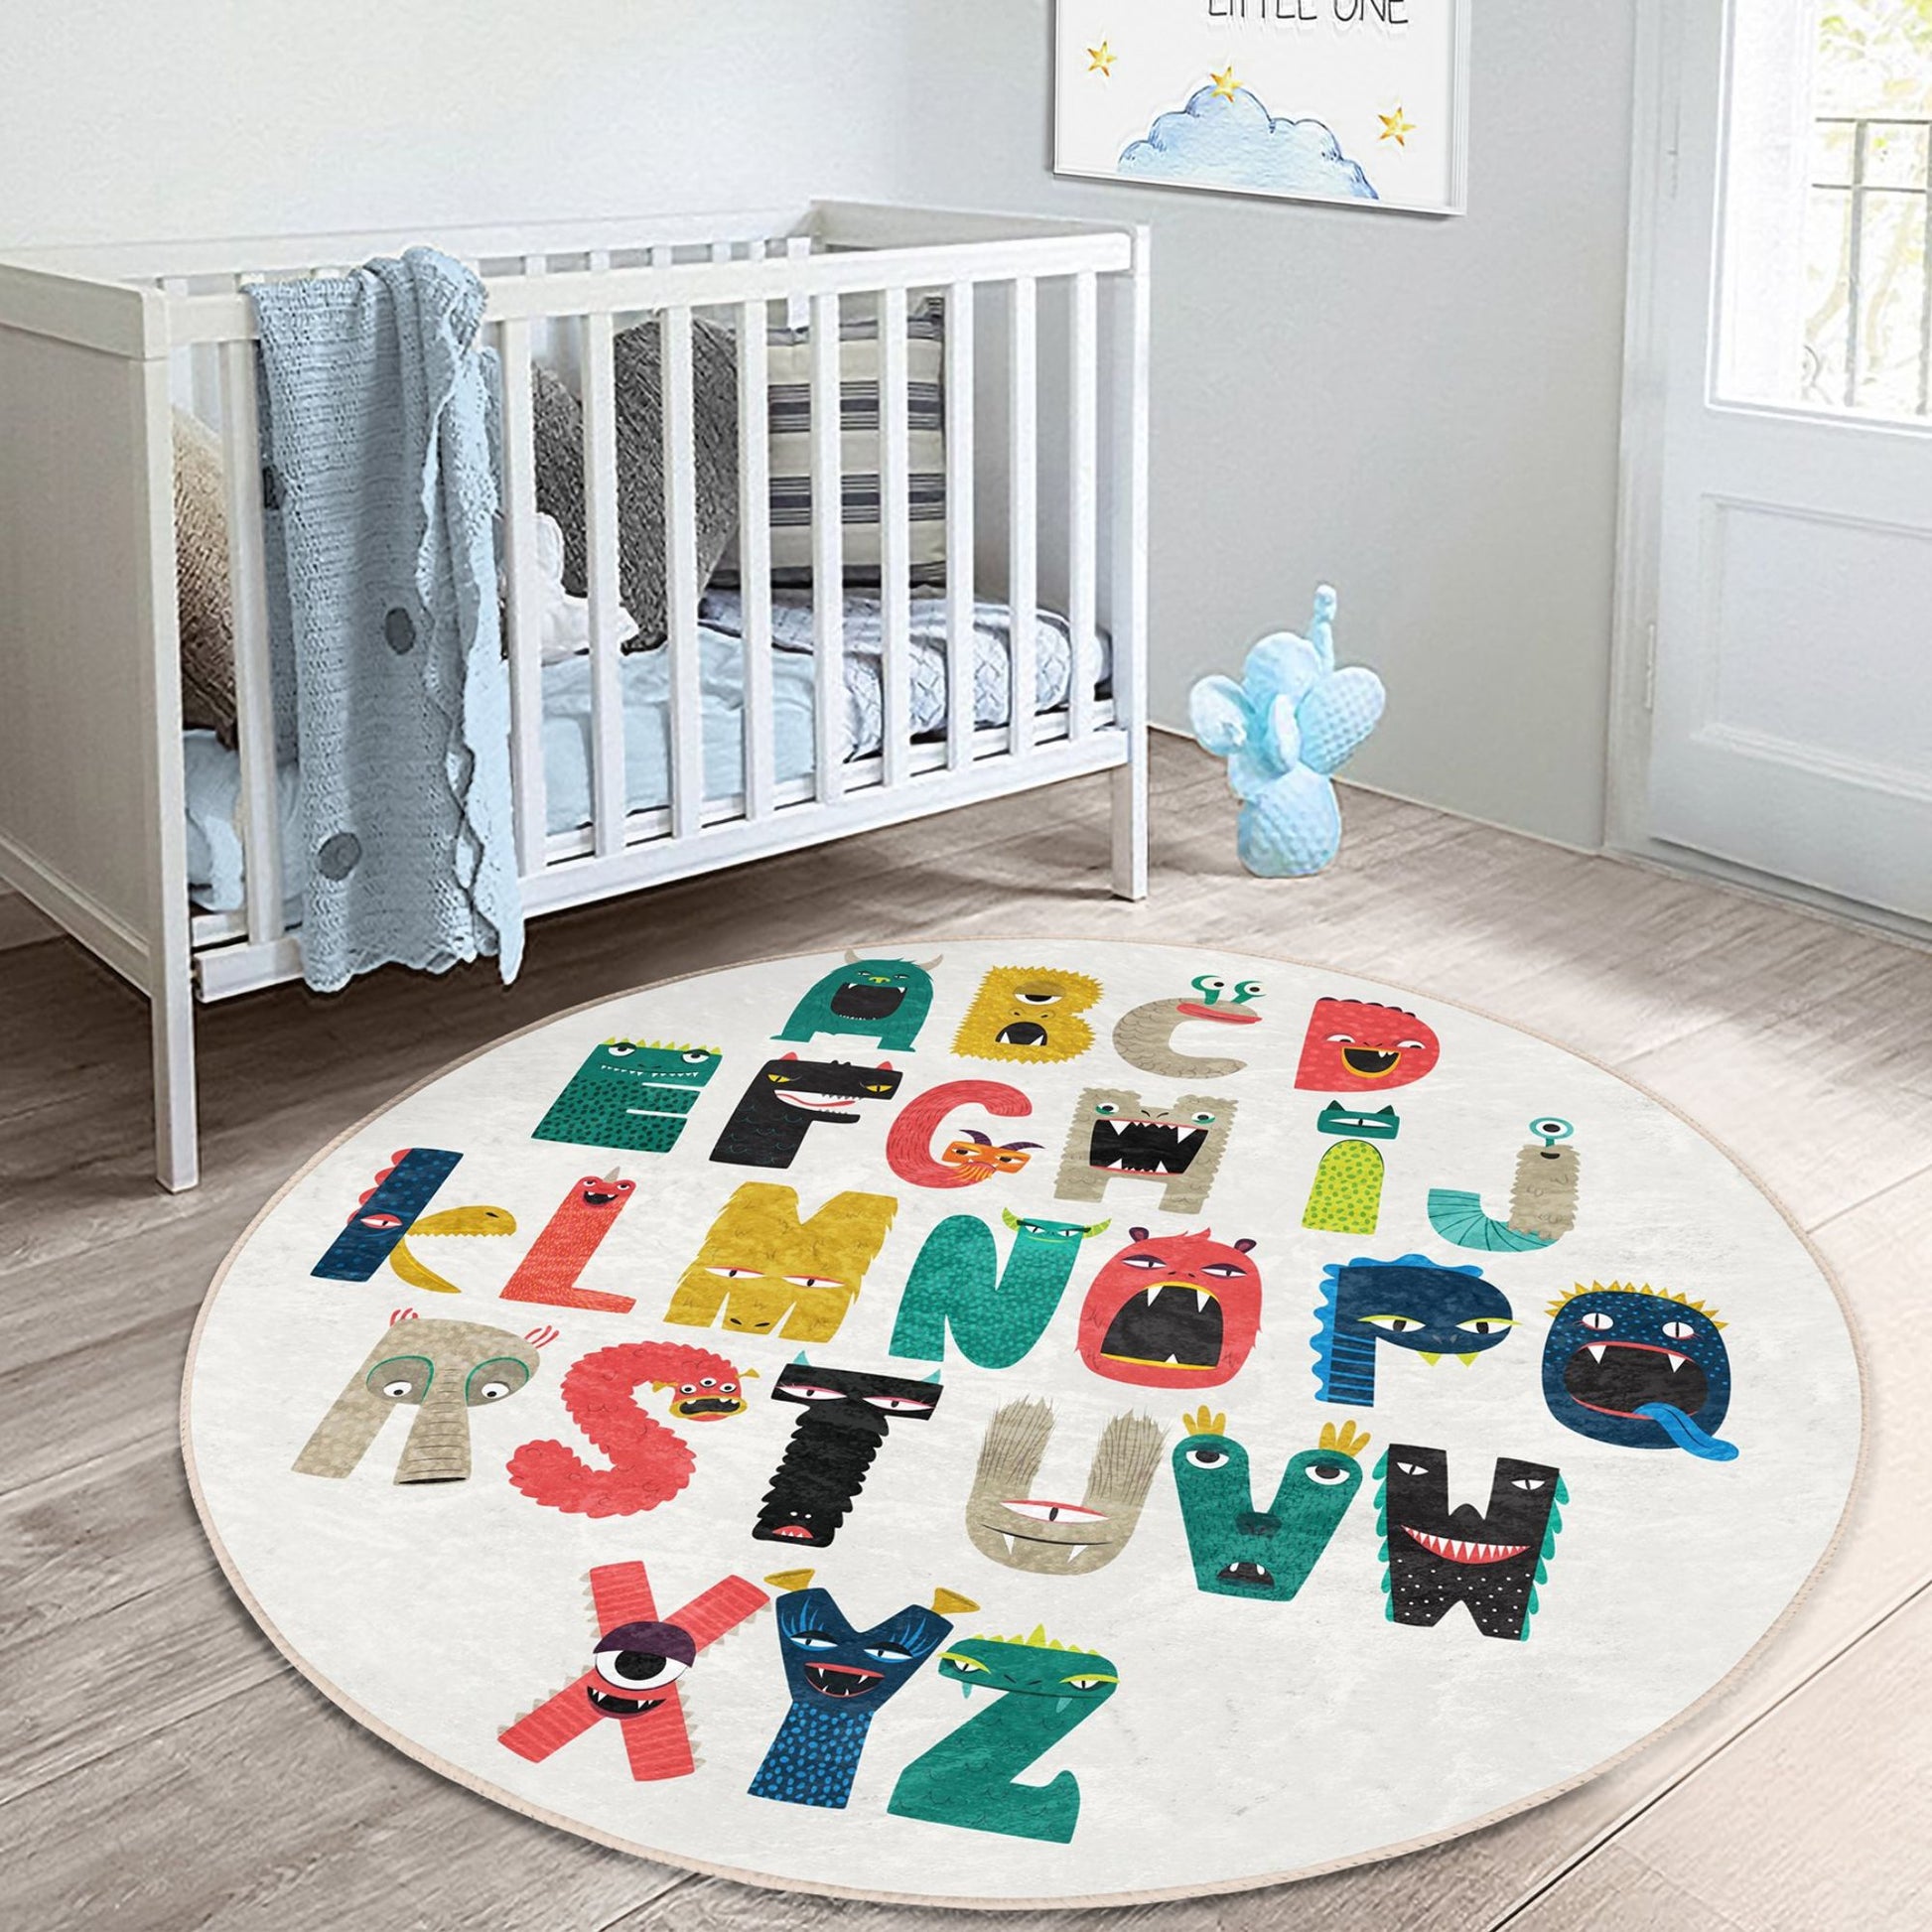 Rug with Alphabet Design for Kids' Play Area